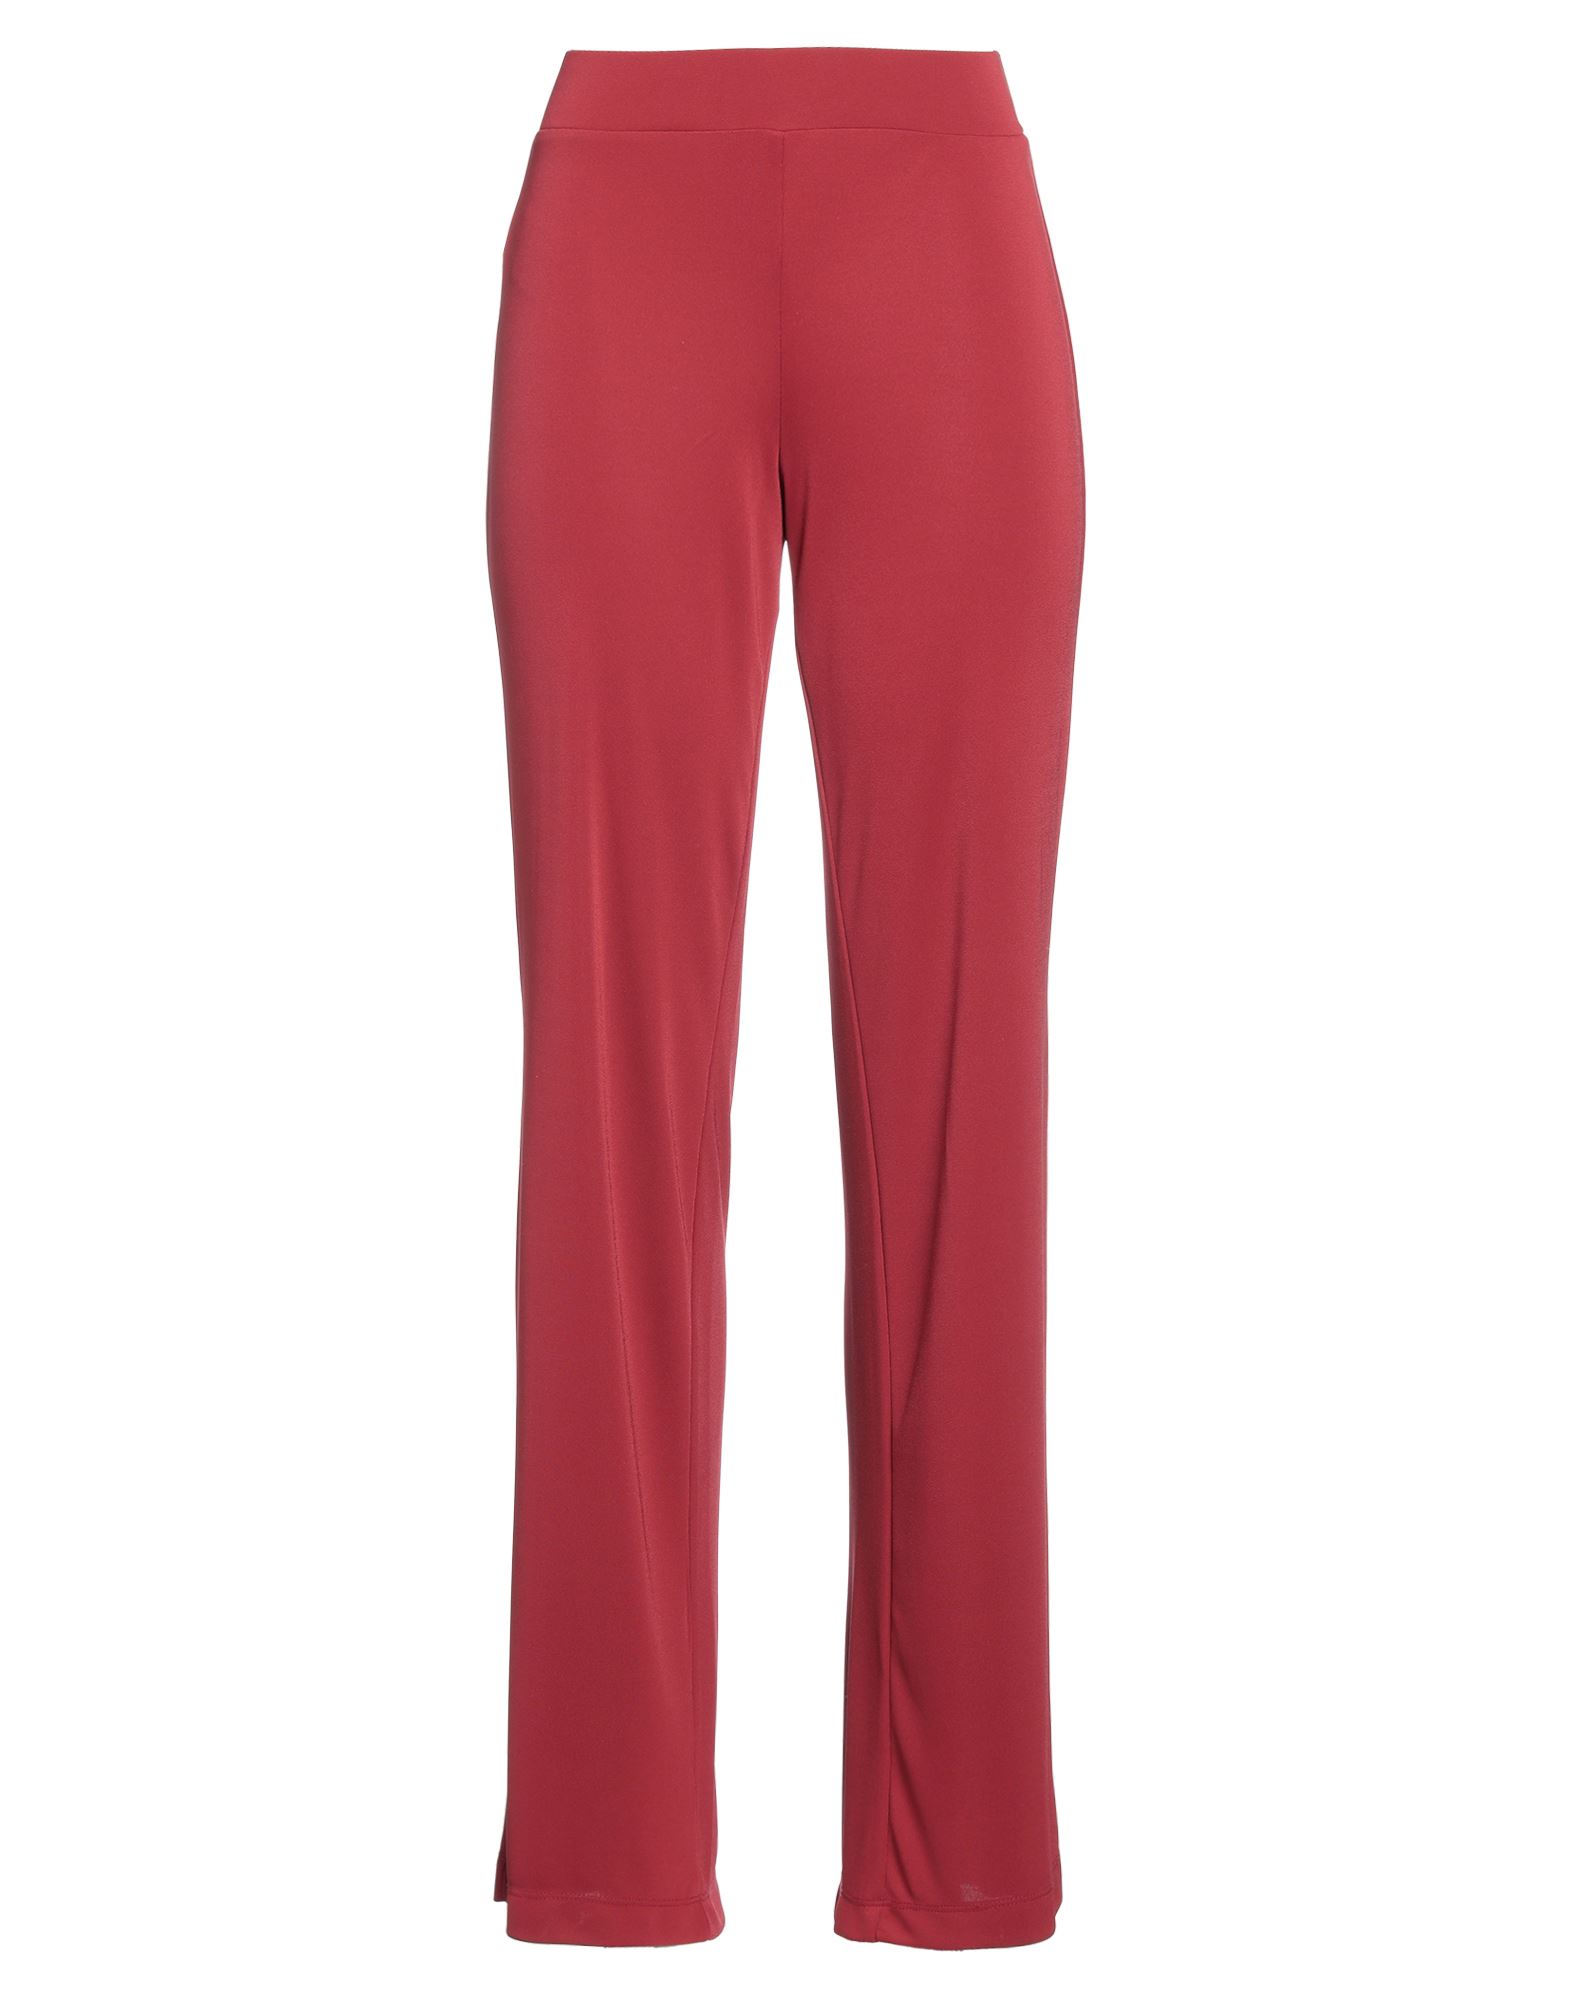 Diana Gallesi Woman Pants Garnet Size 14 Polyester In Red